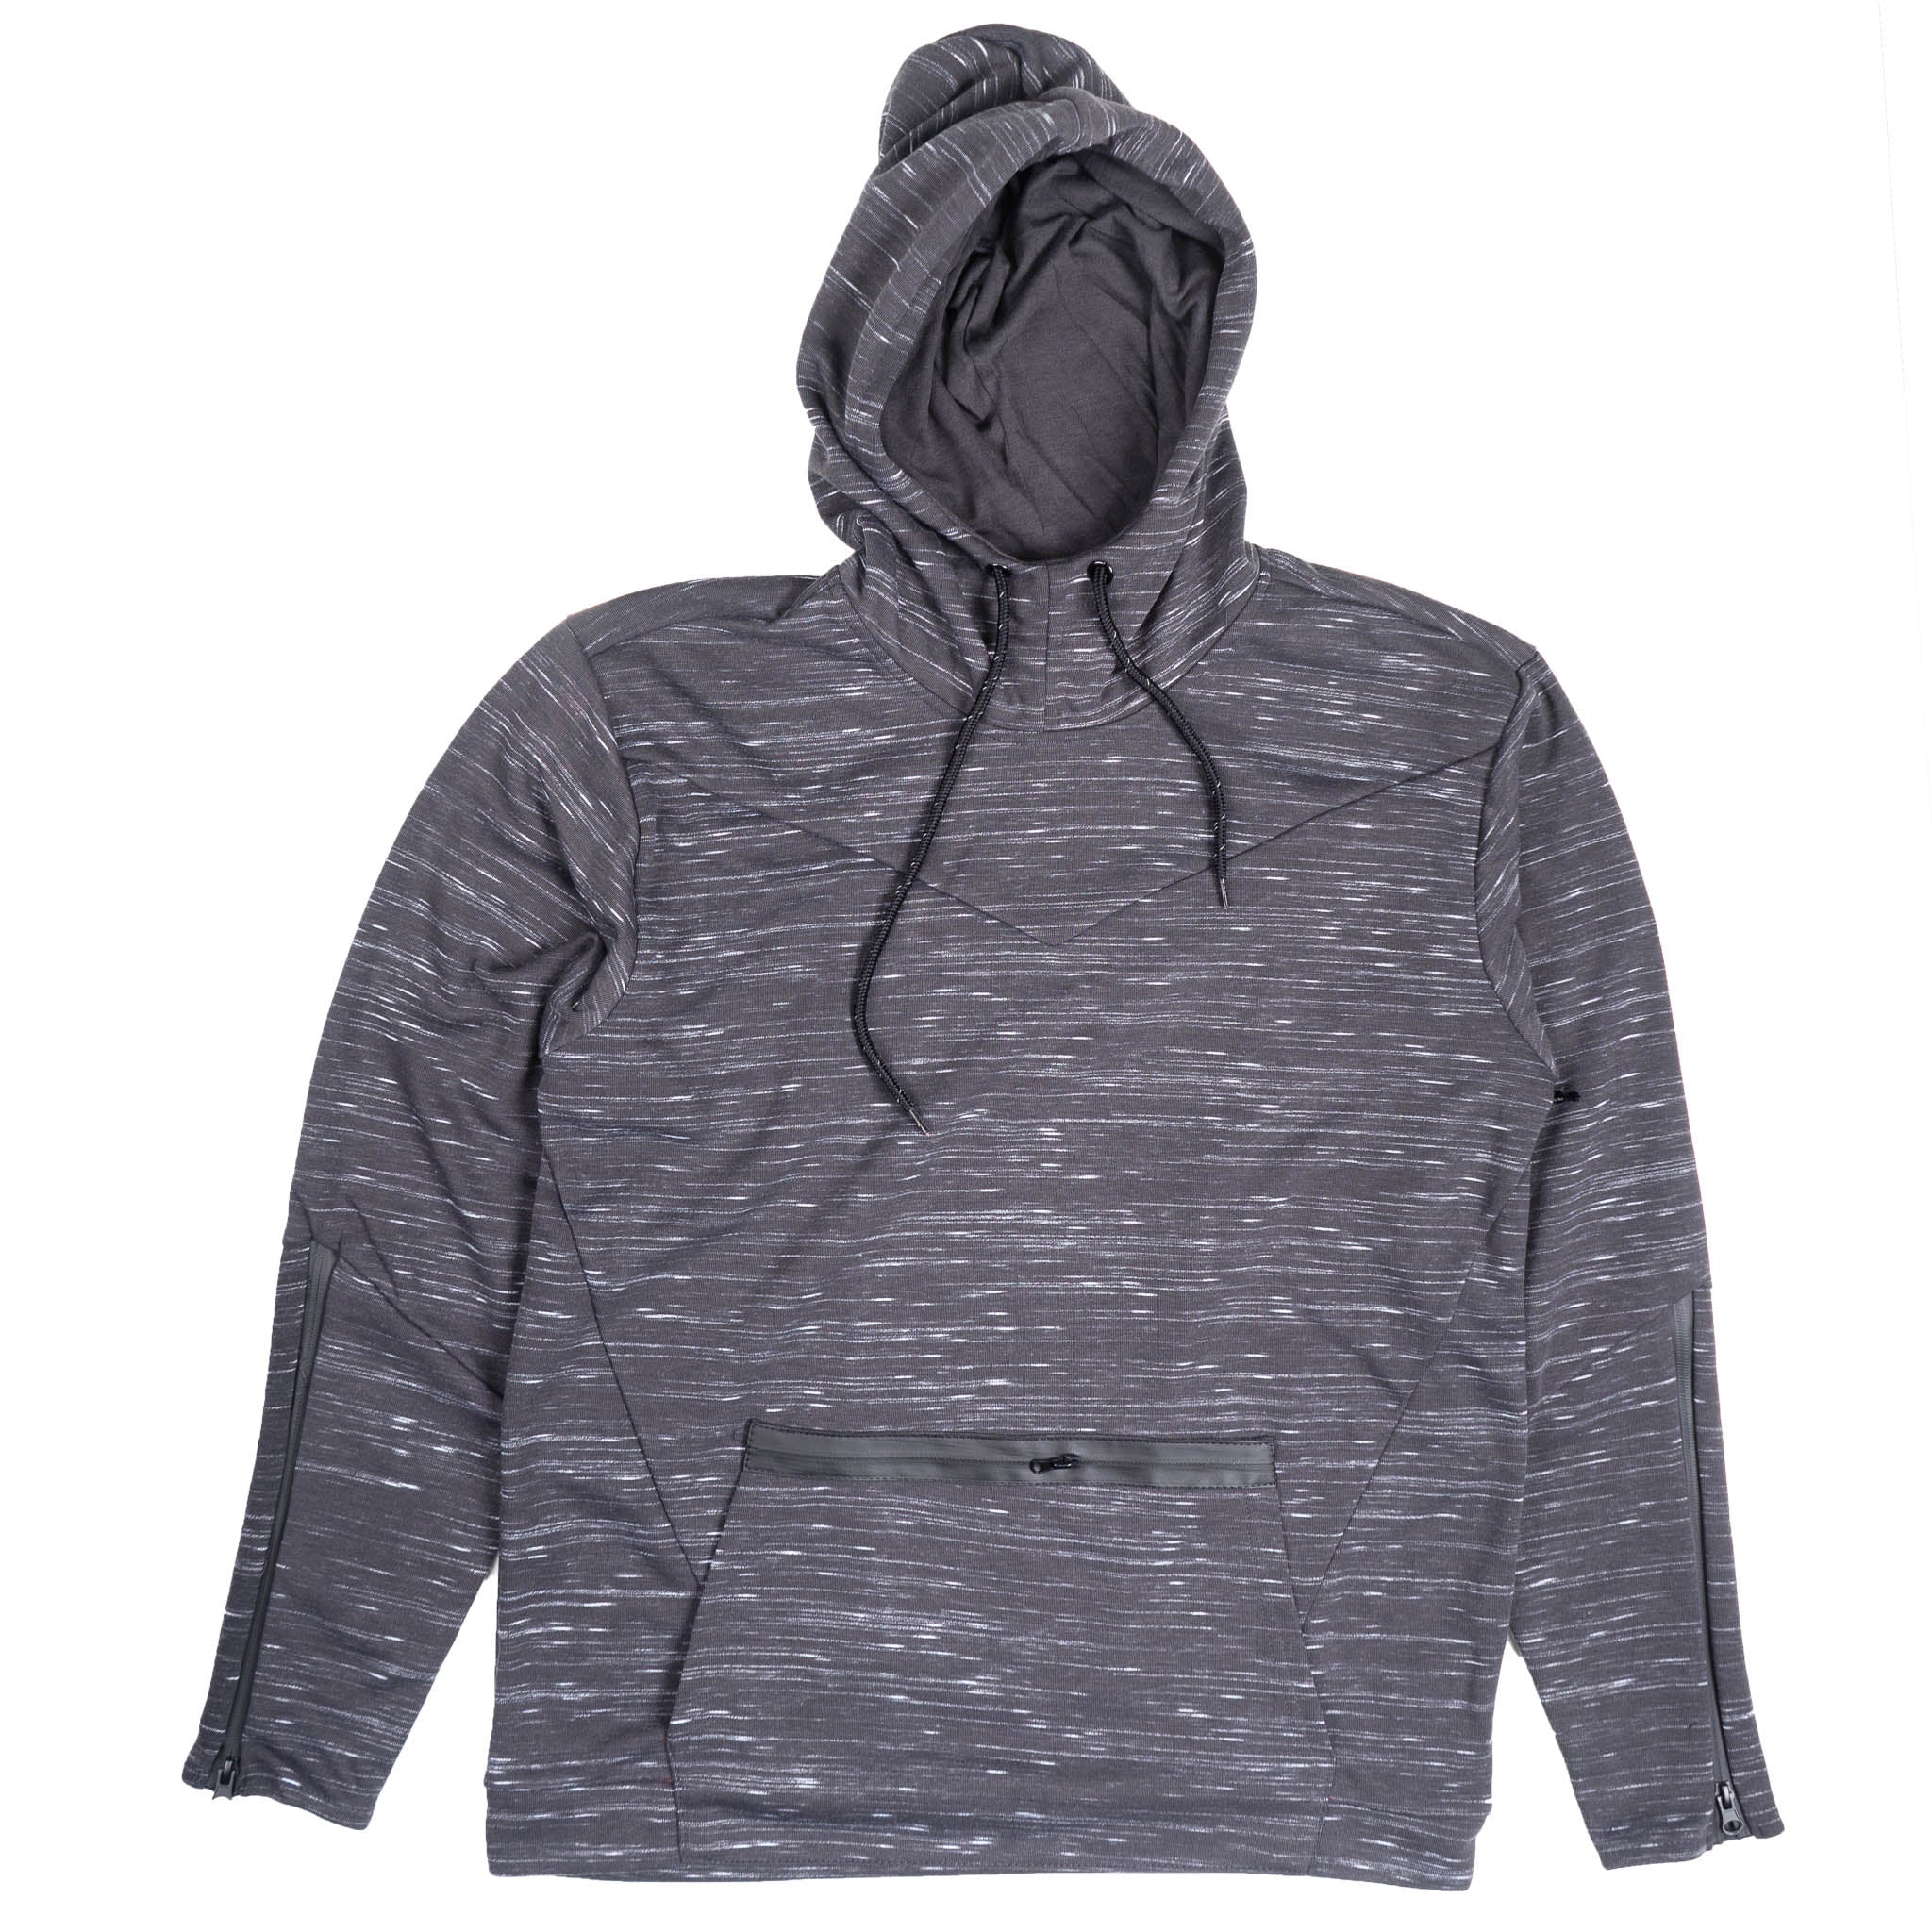 ROYAL BLUE TECH FLEECE PULLOVER CHARCOAL MARLED - 87074PH